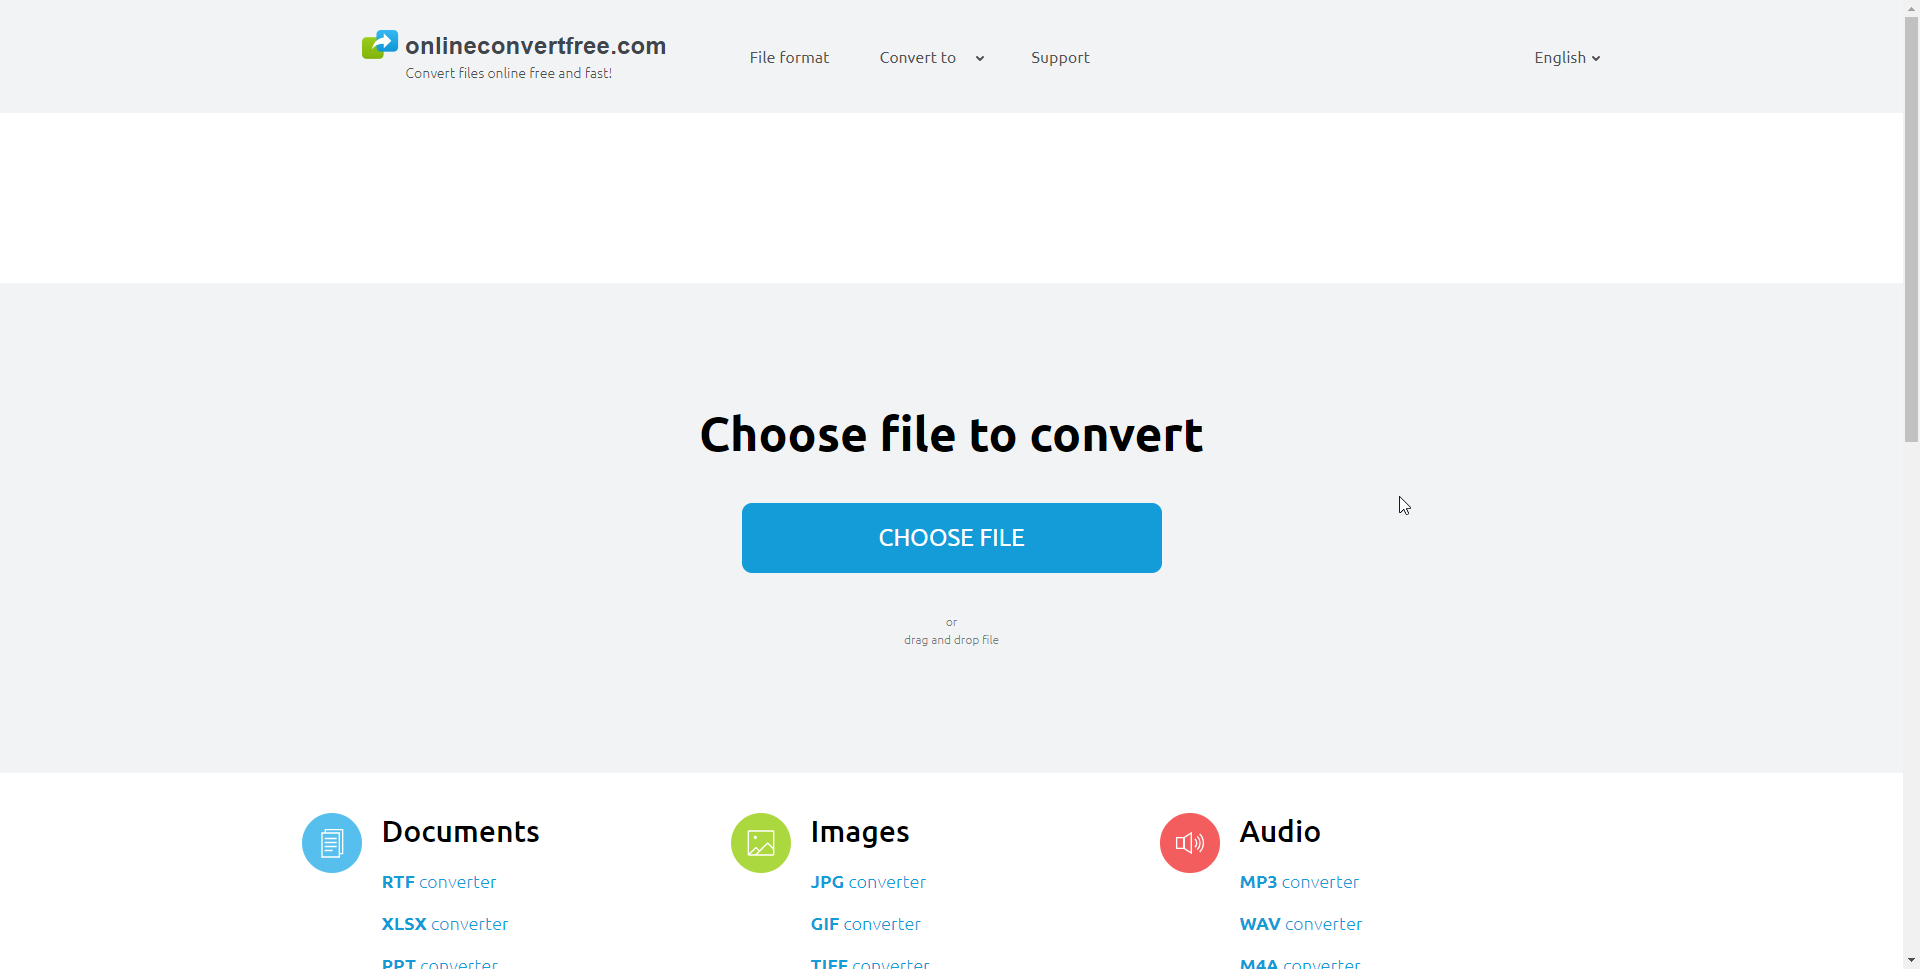 List of top 5 free online file converters